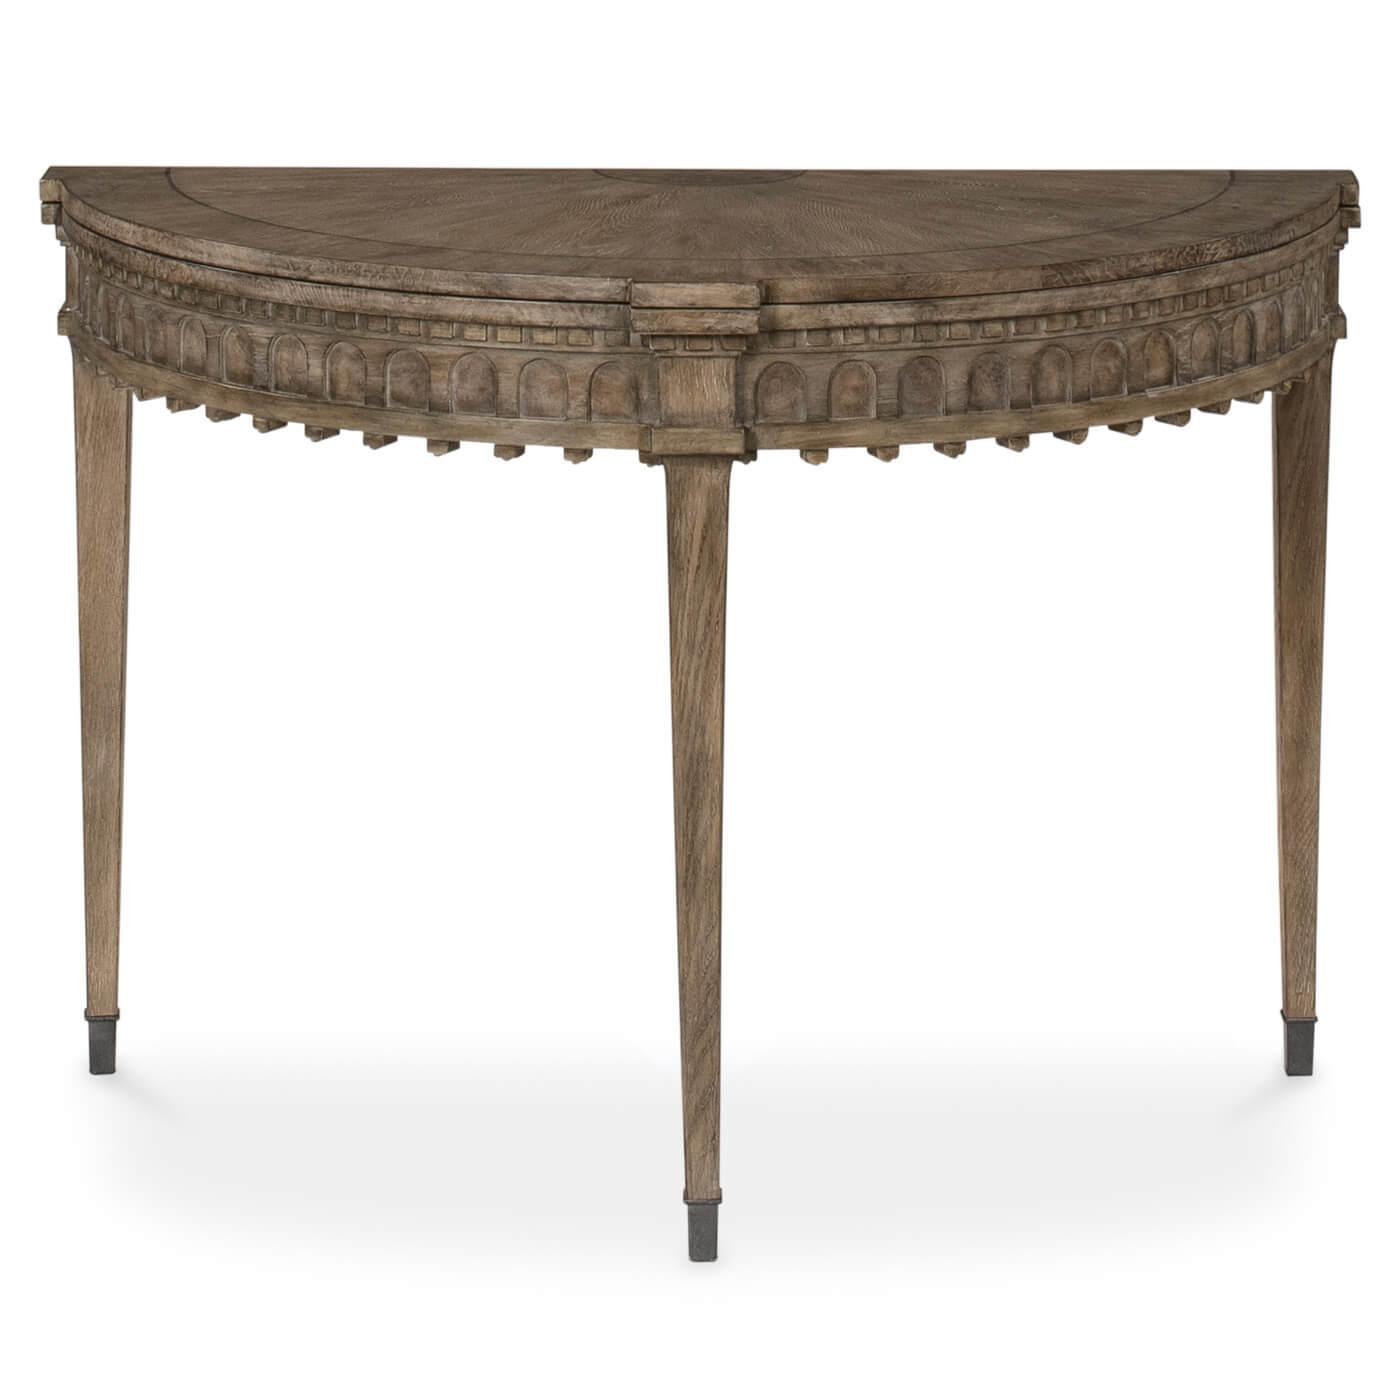 A Gustavian-style flip-top game table. The top of this table is veneered in radial matched knotty oak with a chestnut burl border and center medallion. It is framed with black inlay and has a heather gray finish. 

This beautiful table has an